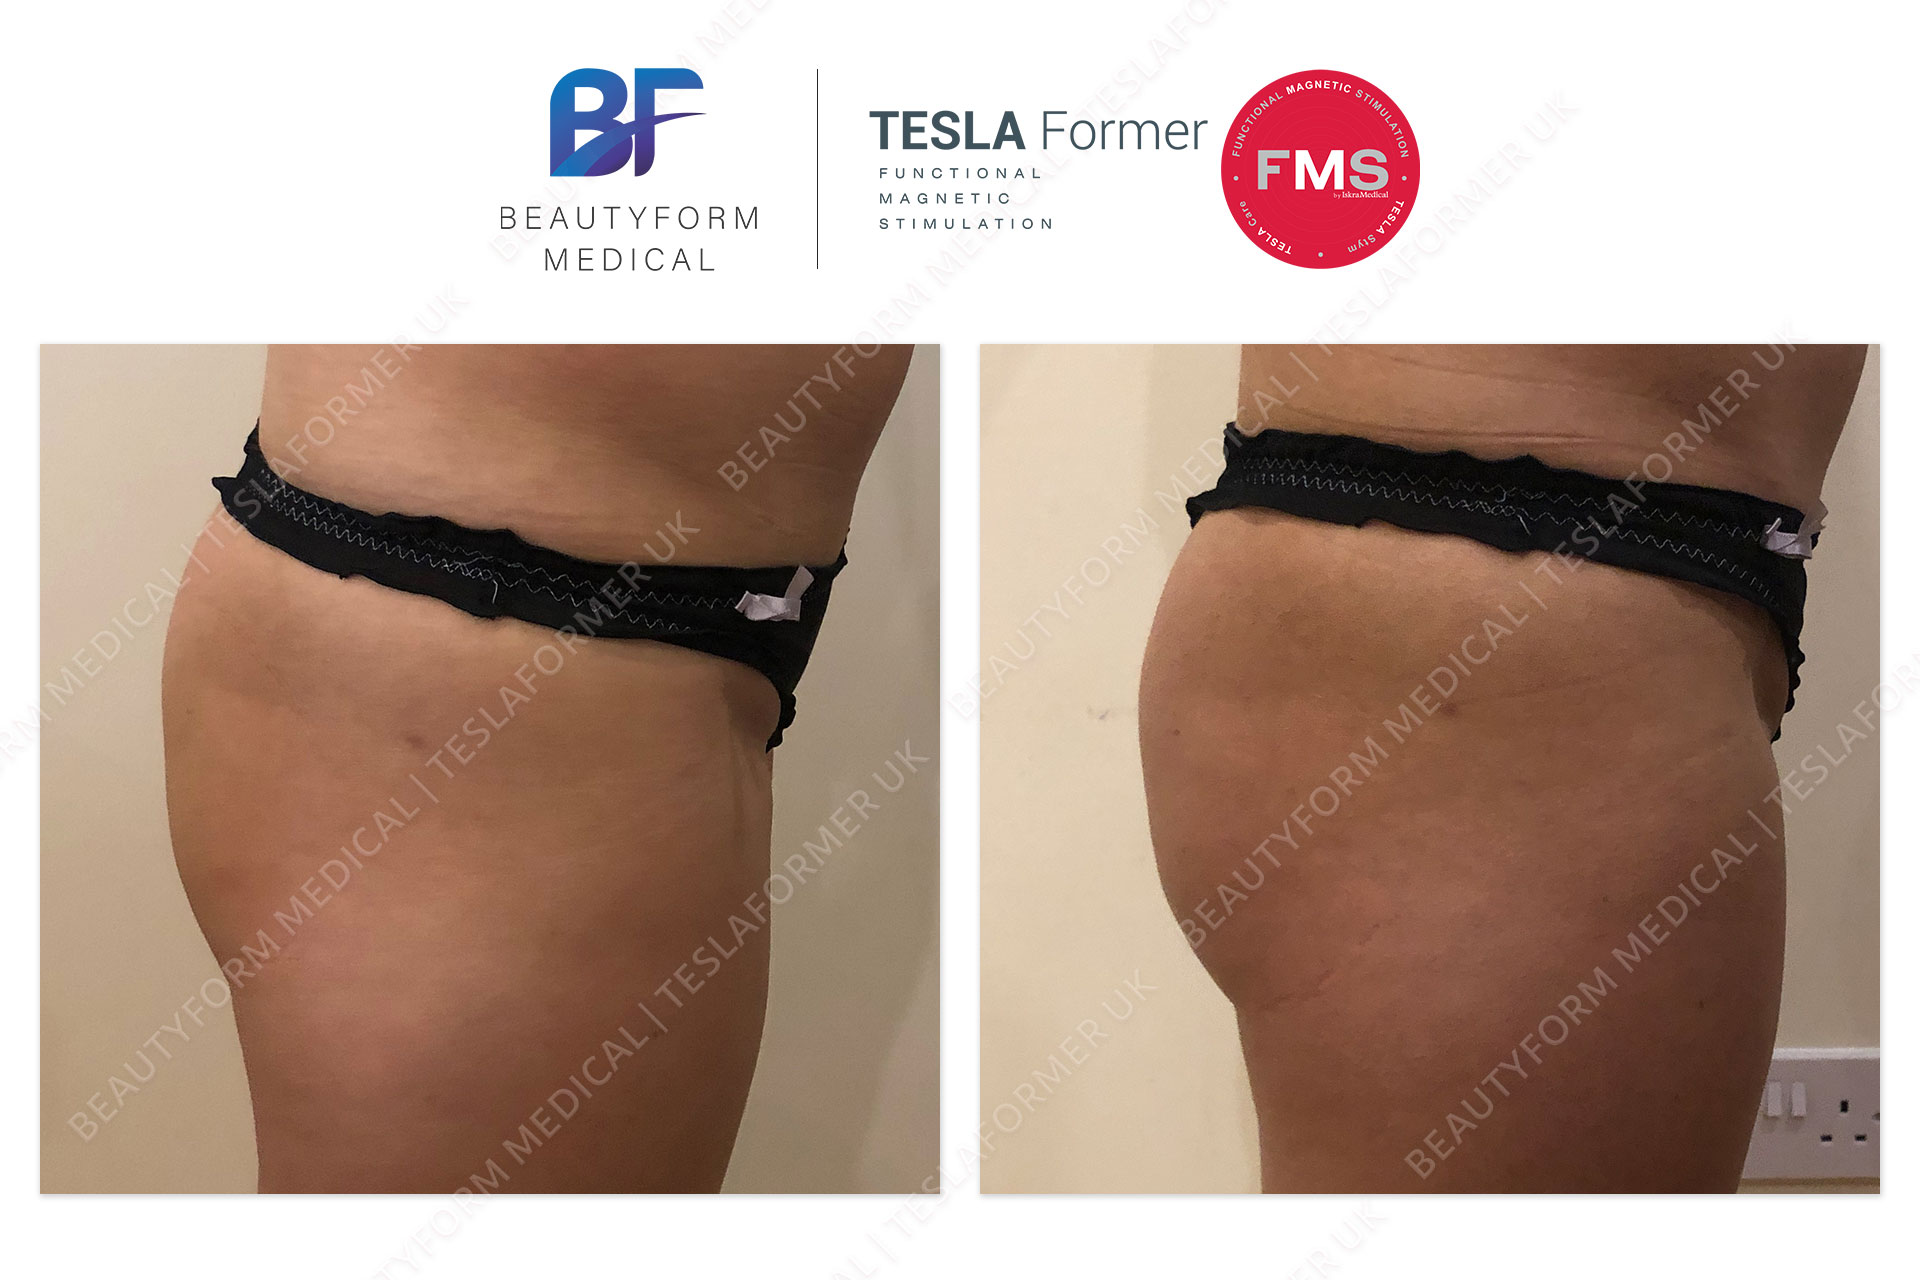 Tesla Former buttocks before and after